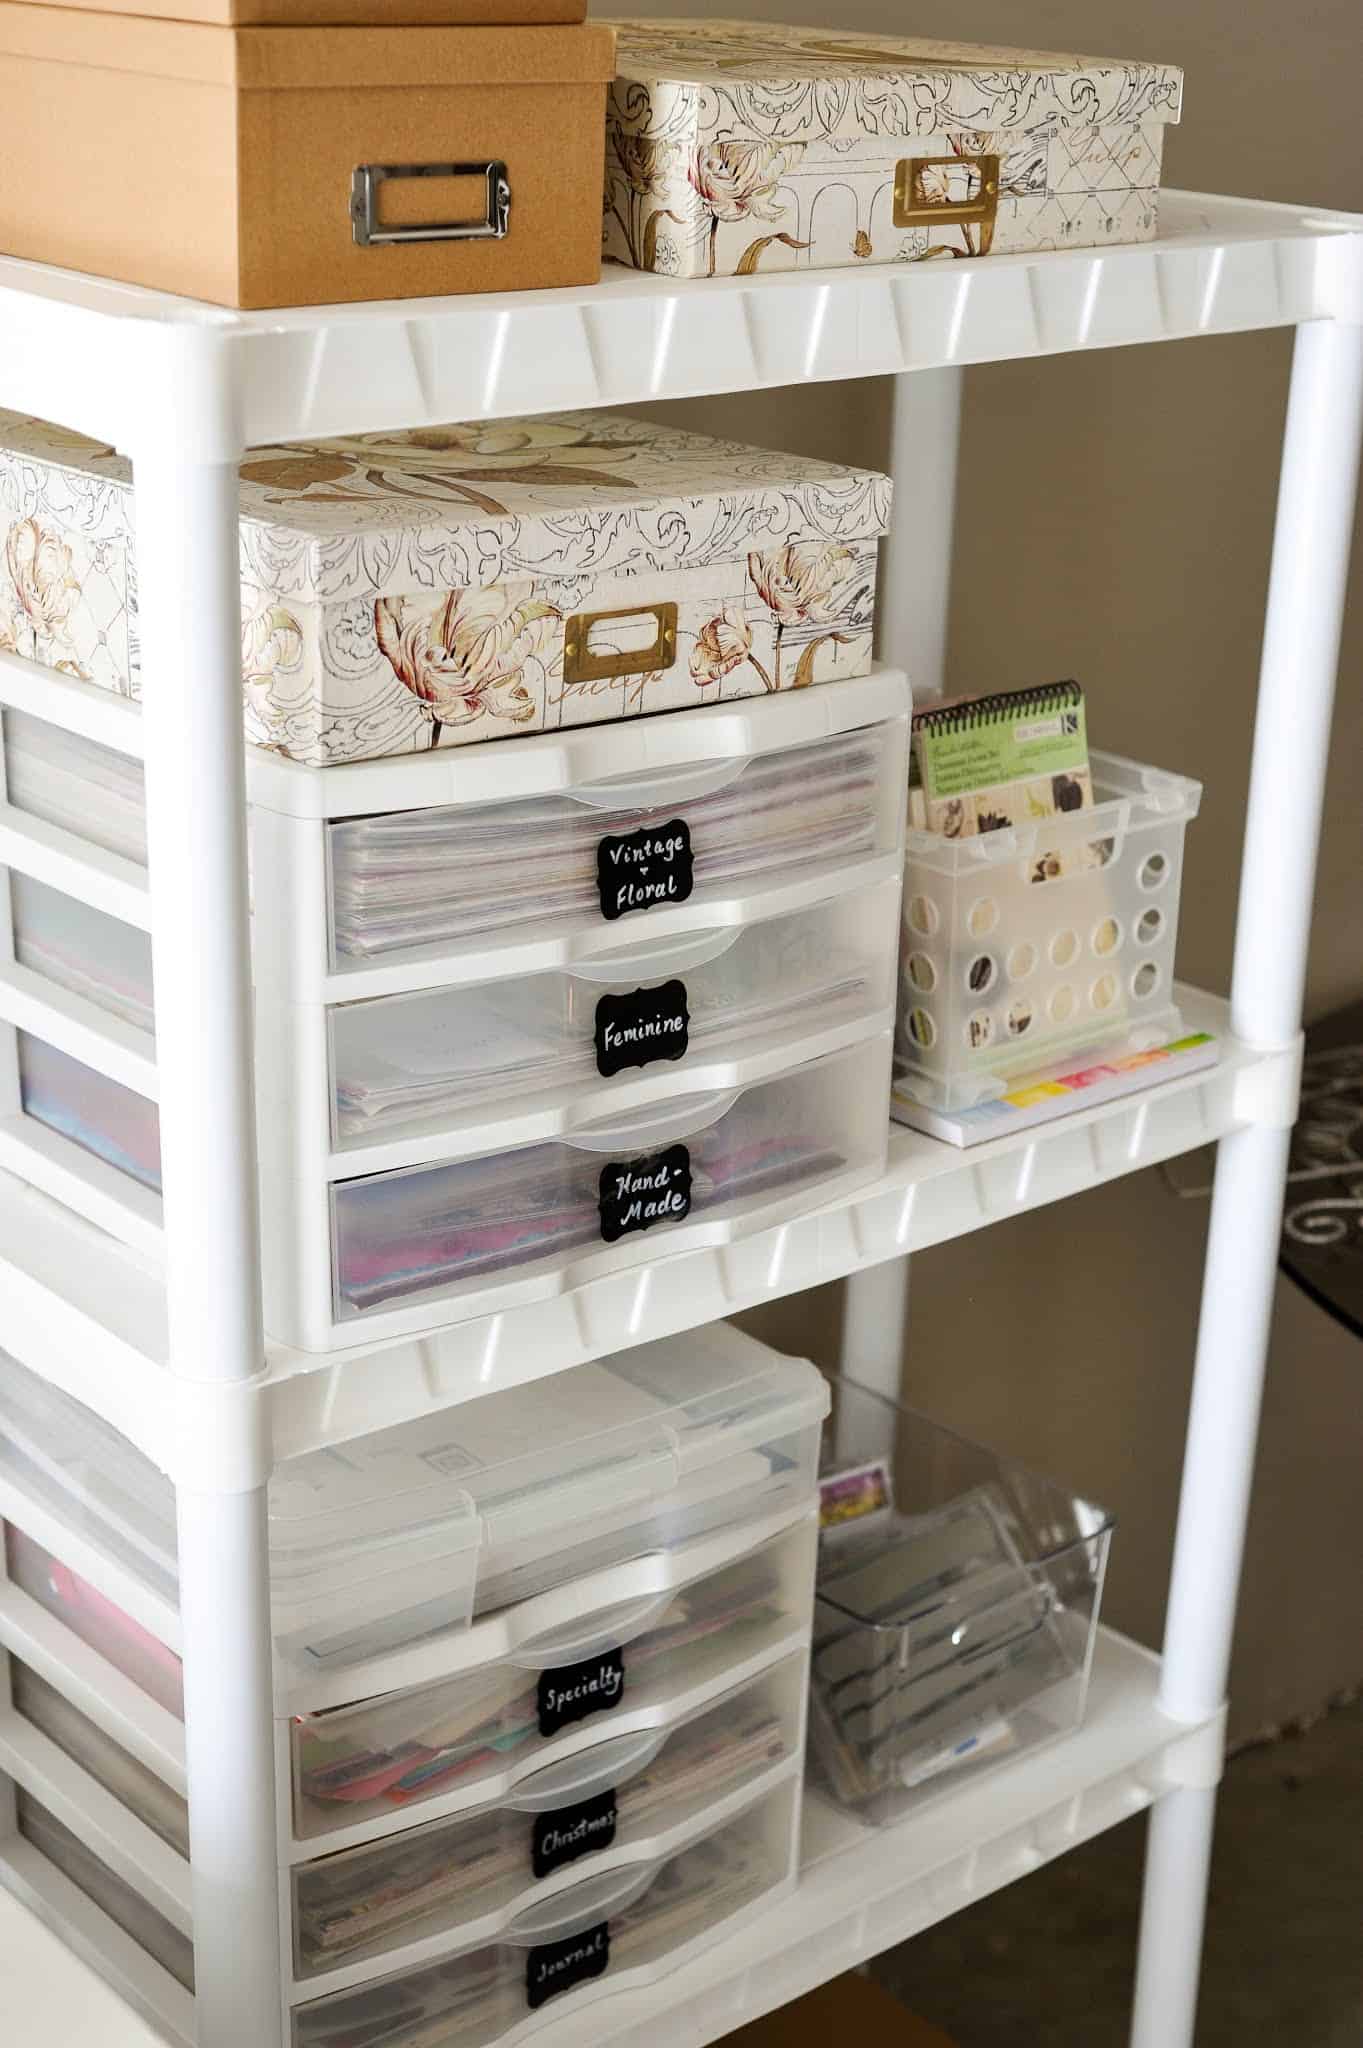 Art/Craft Room Organization: Organizing Paper, Rubber Stamps, and More